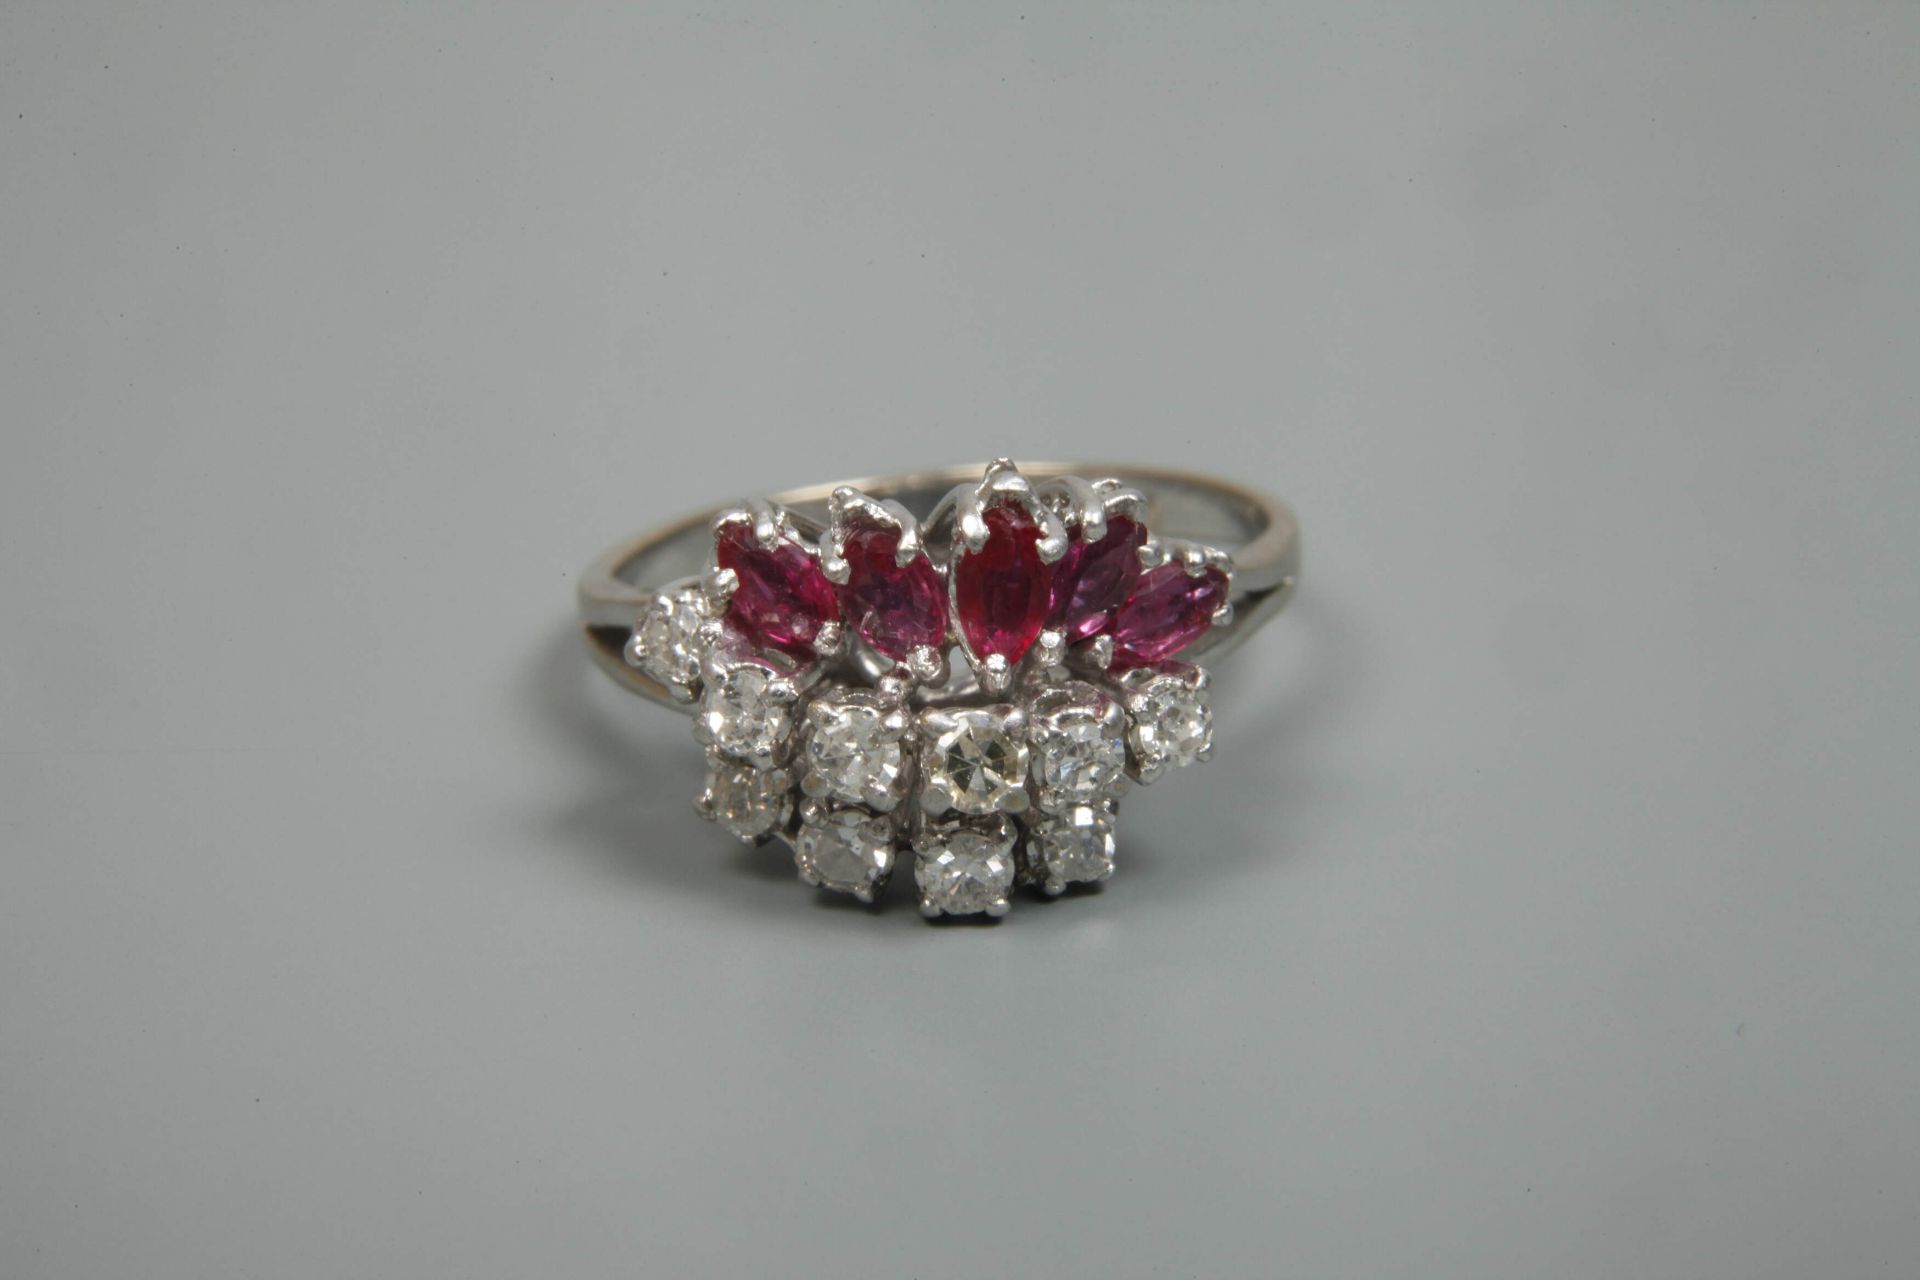 Lady's ring with rubies and brilliant-cut diamonds - Image 2 of 4